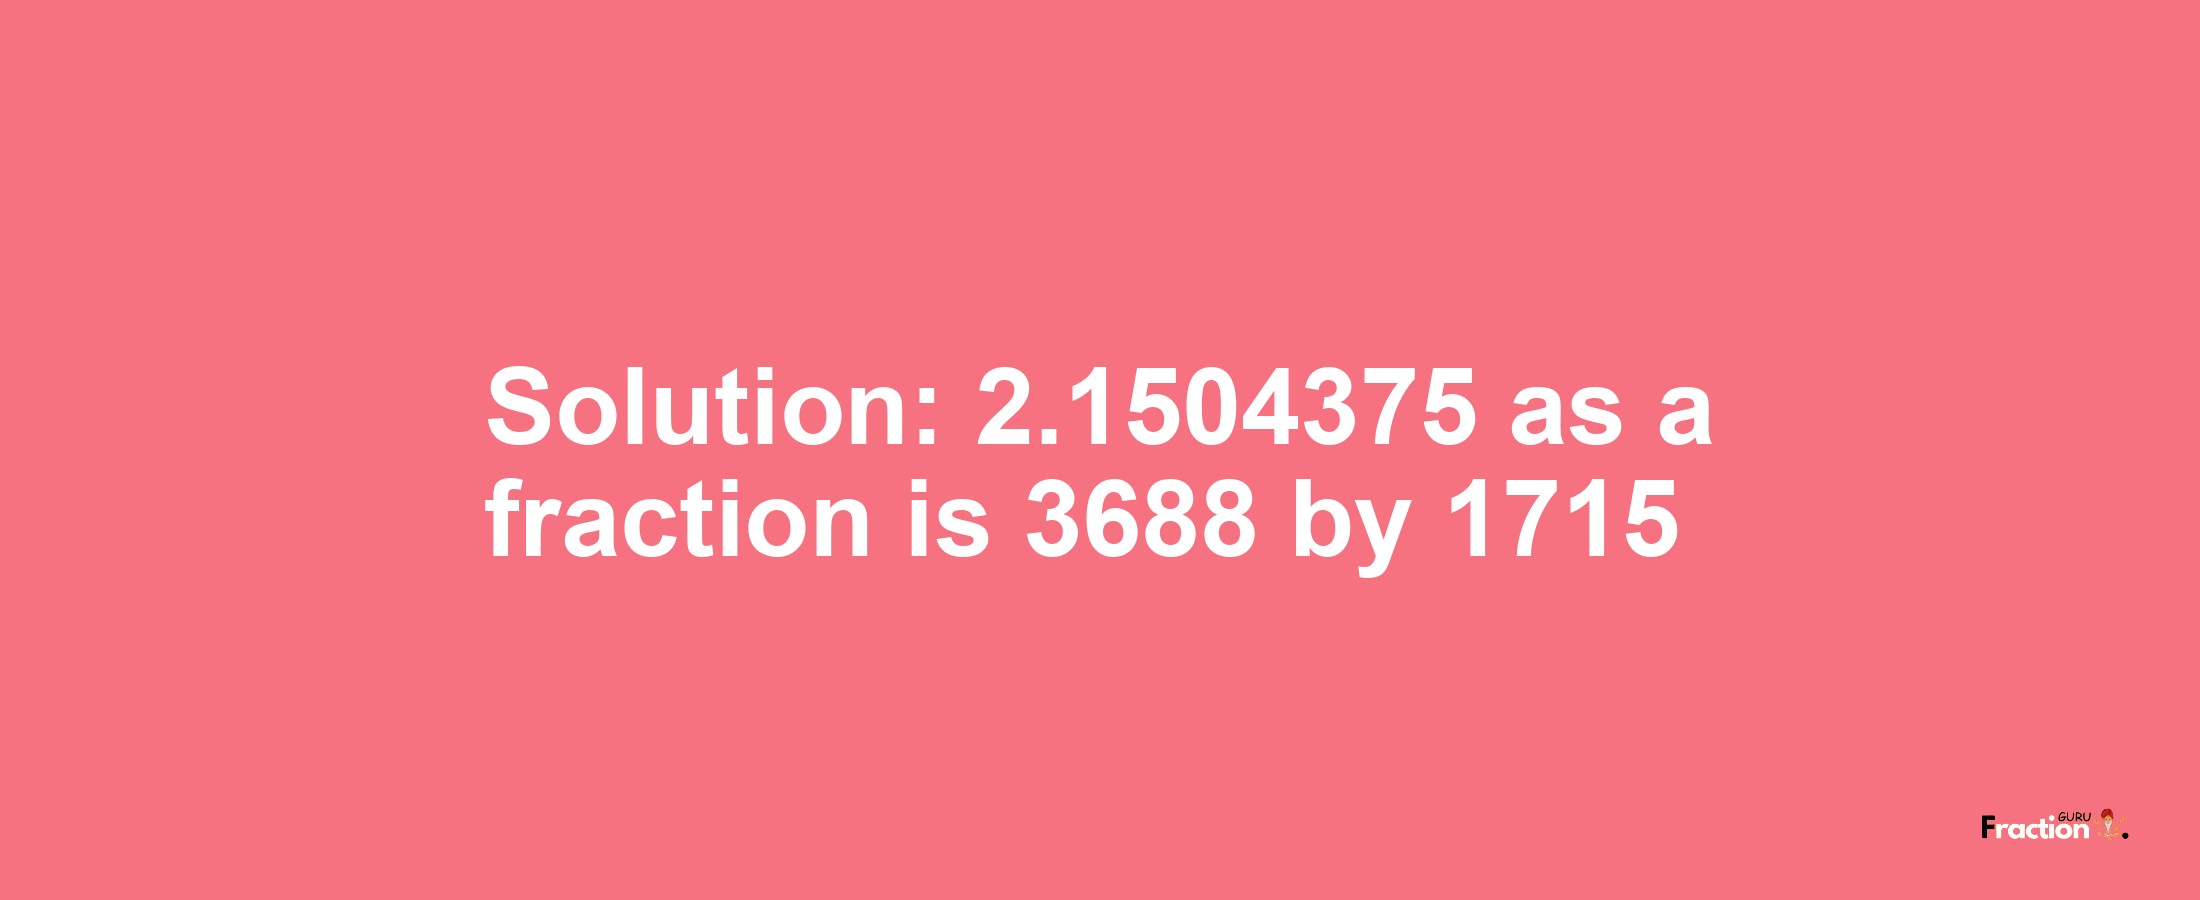 Solution:2.1504375 as a fraction is 3688/1715